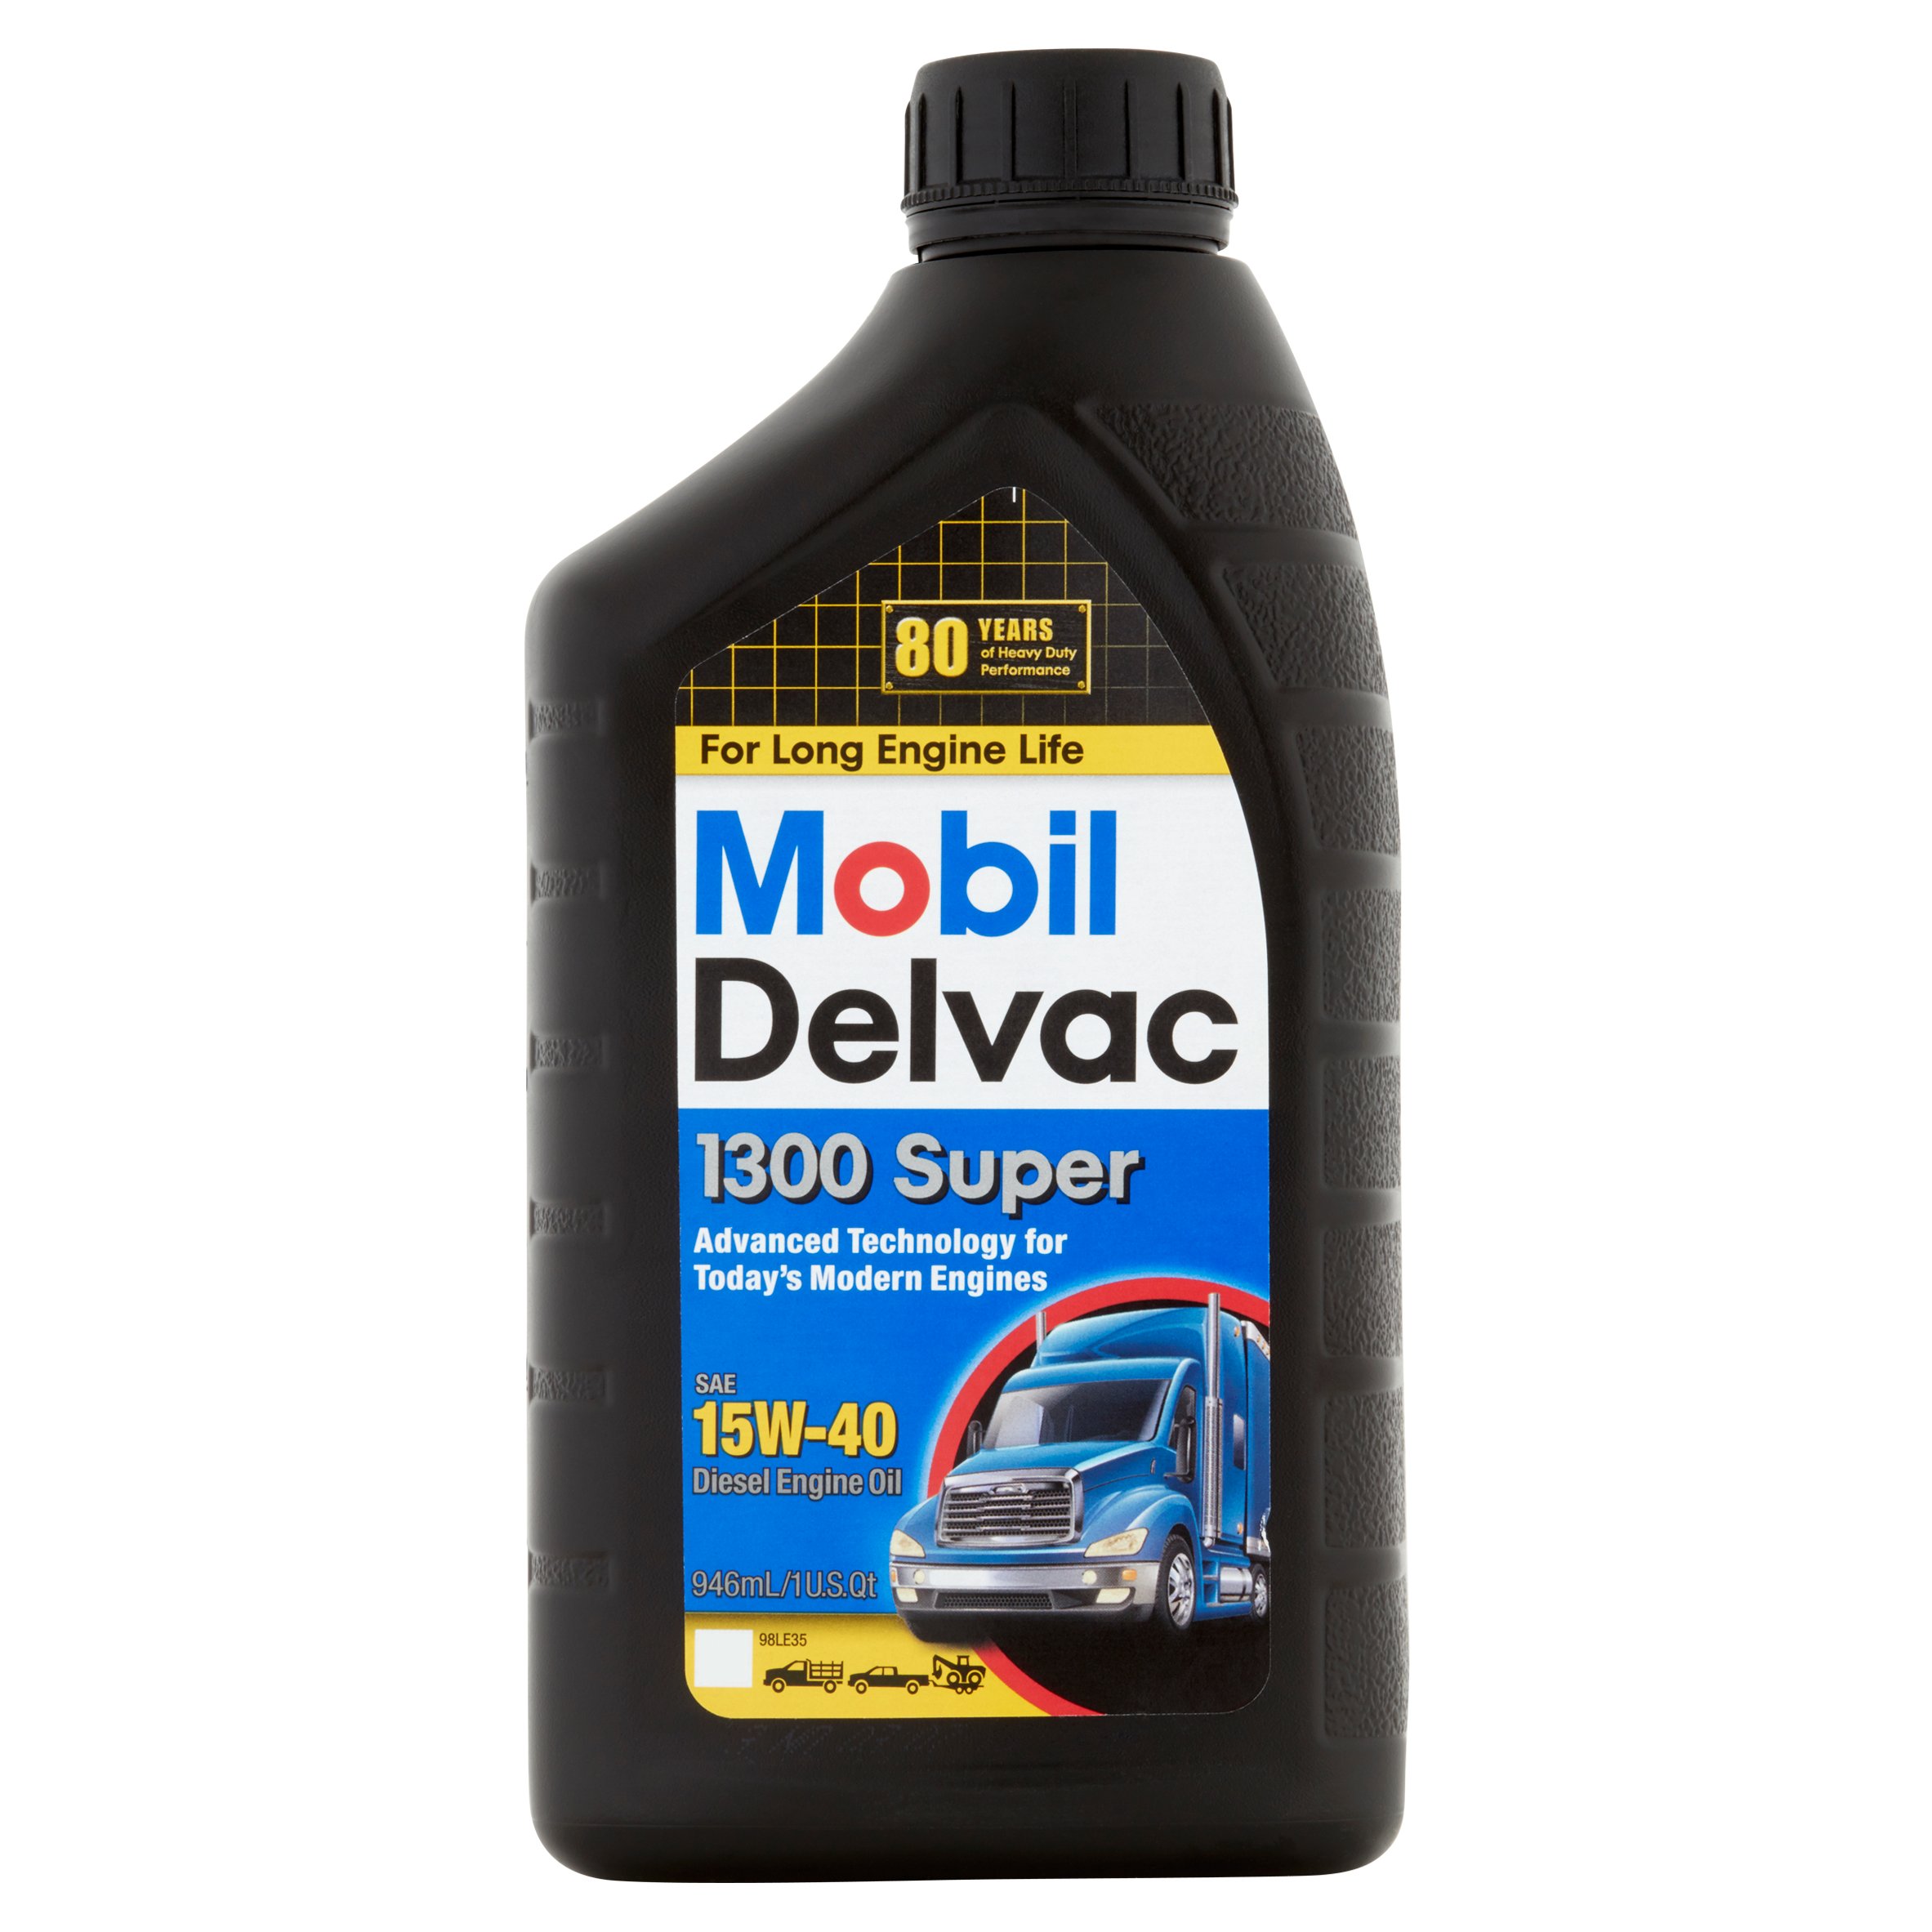 Is Mobil Delvac Good Oil